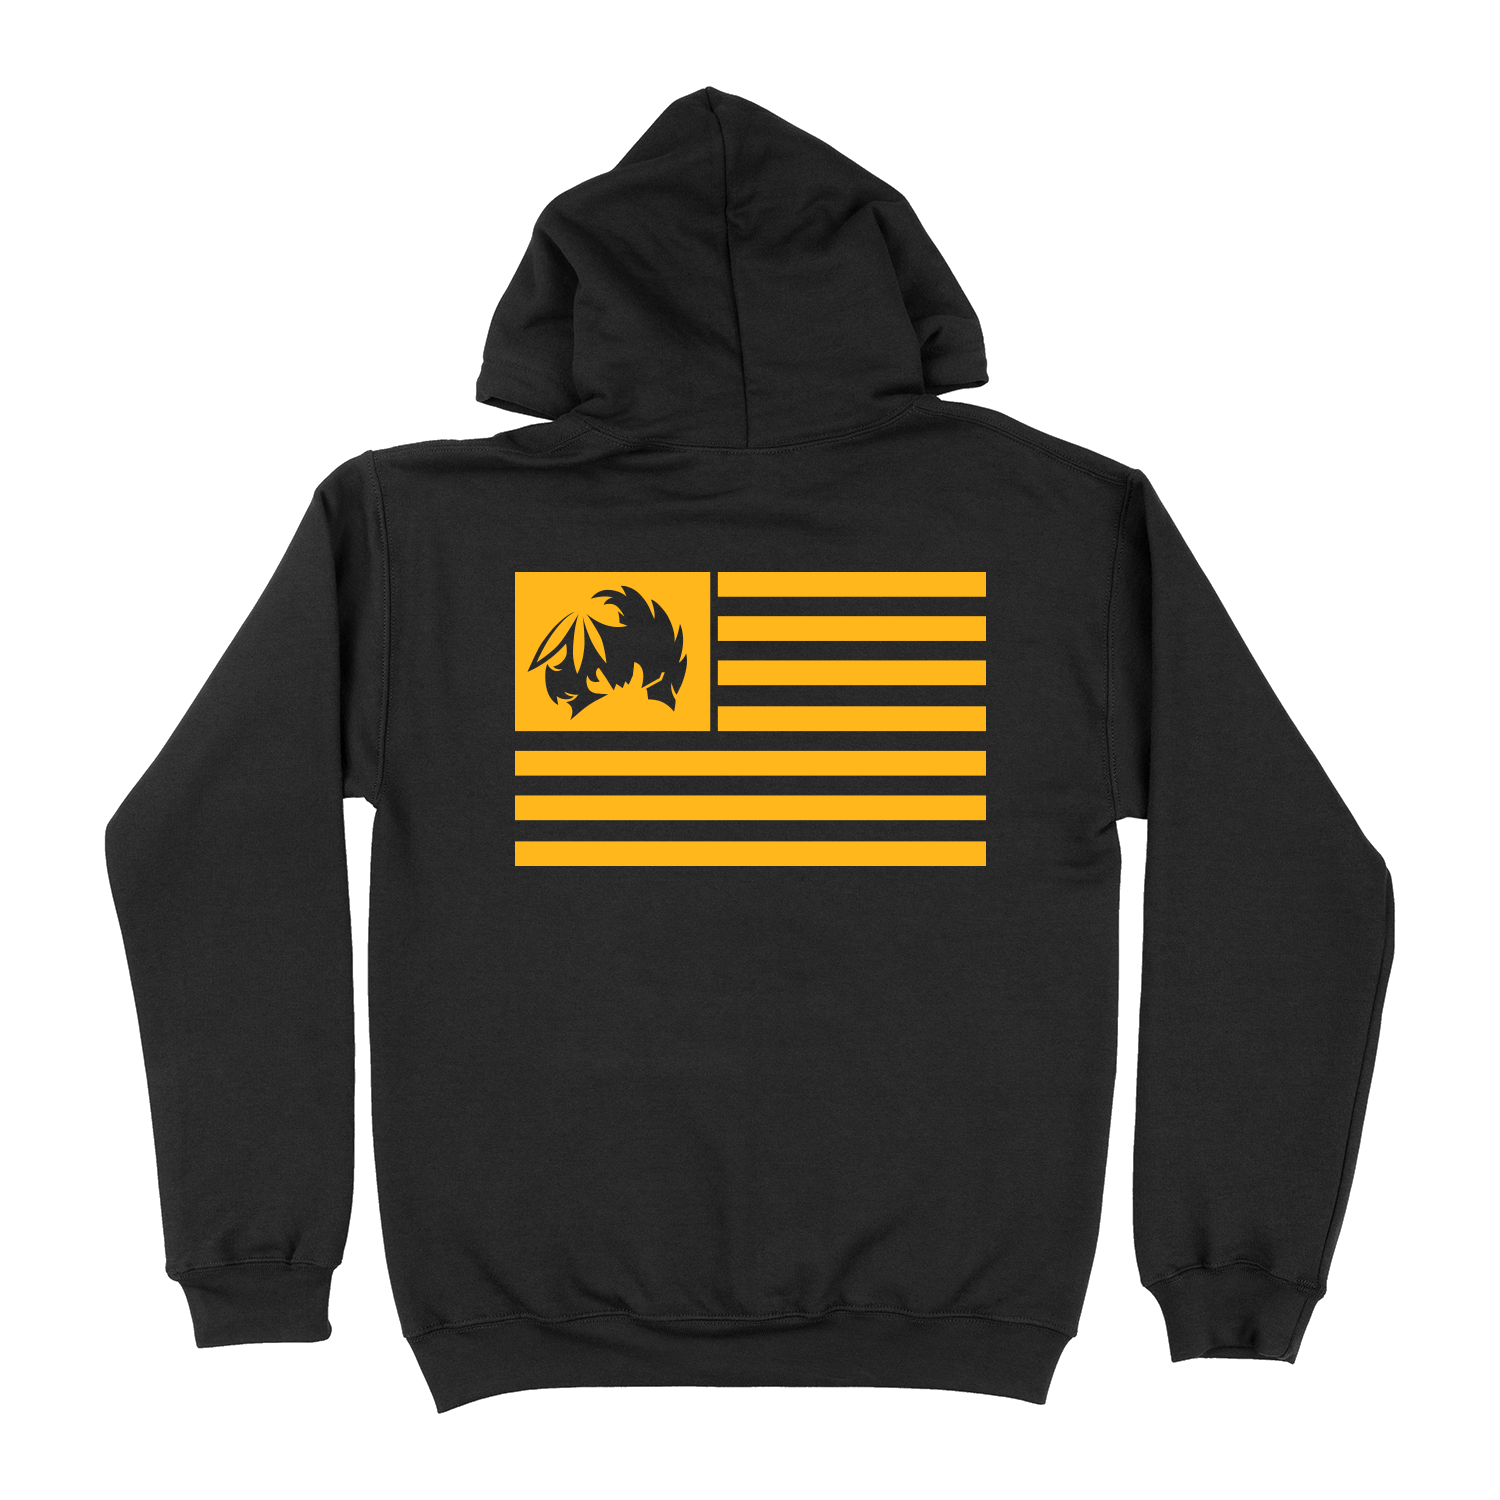 TICAL New York Pullover Hoodie Black and Yellow